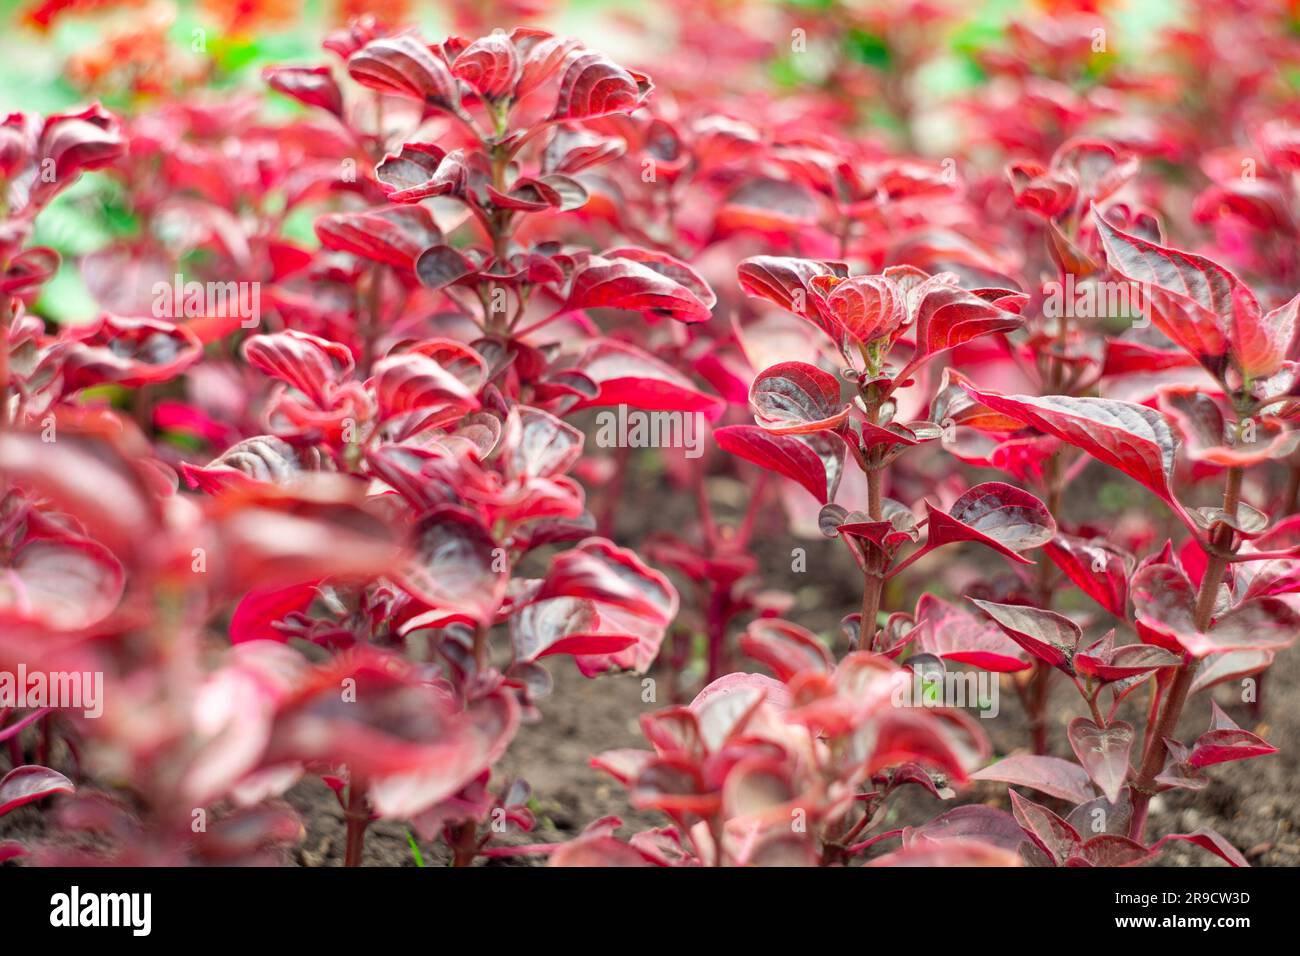 Bright leaves of Herbsts bloodleaf. Iresine herbstii Stock Photo